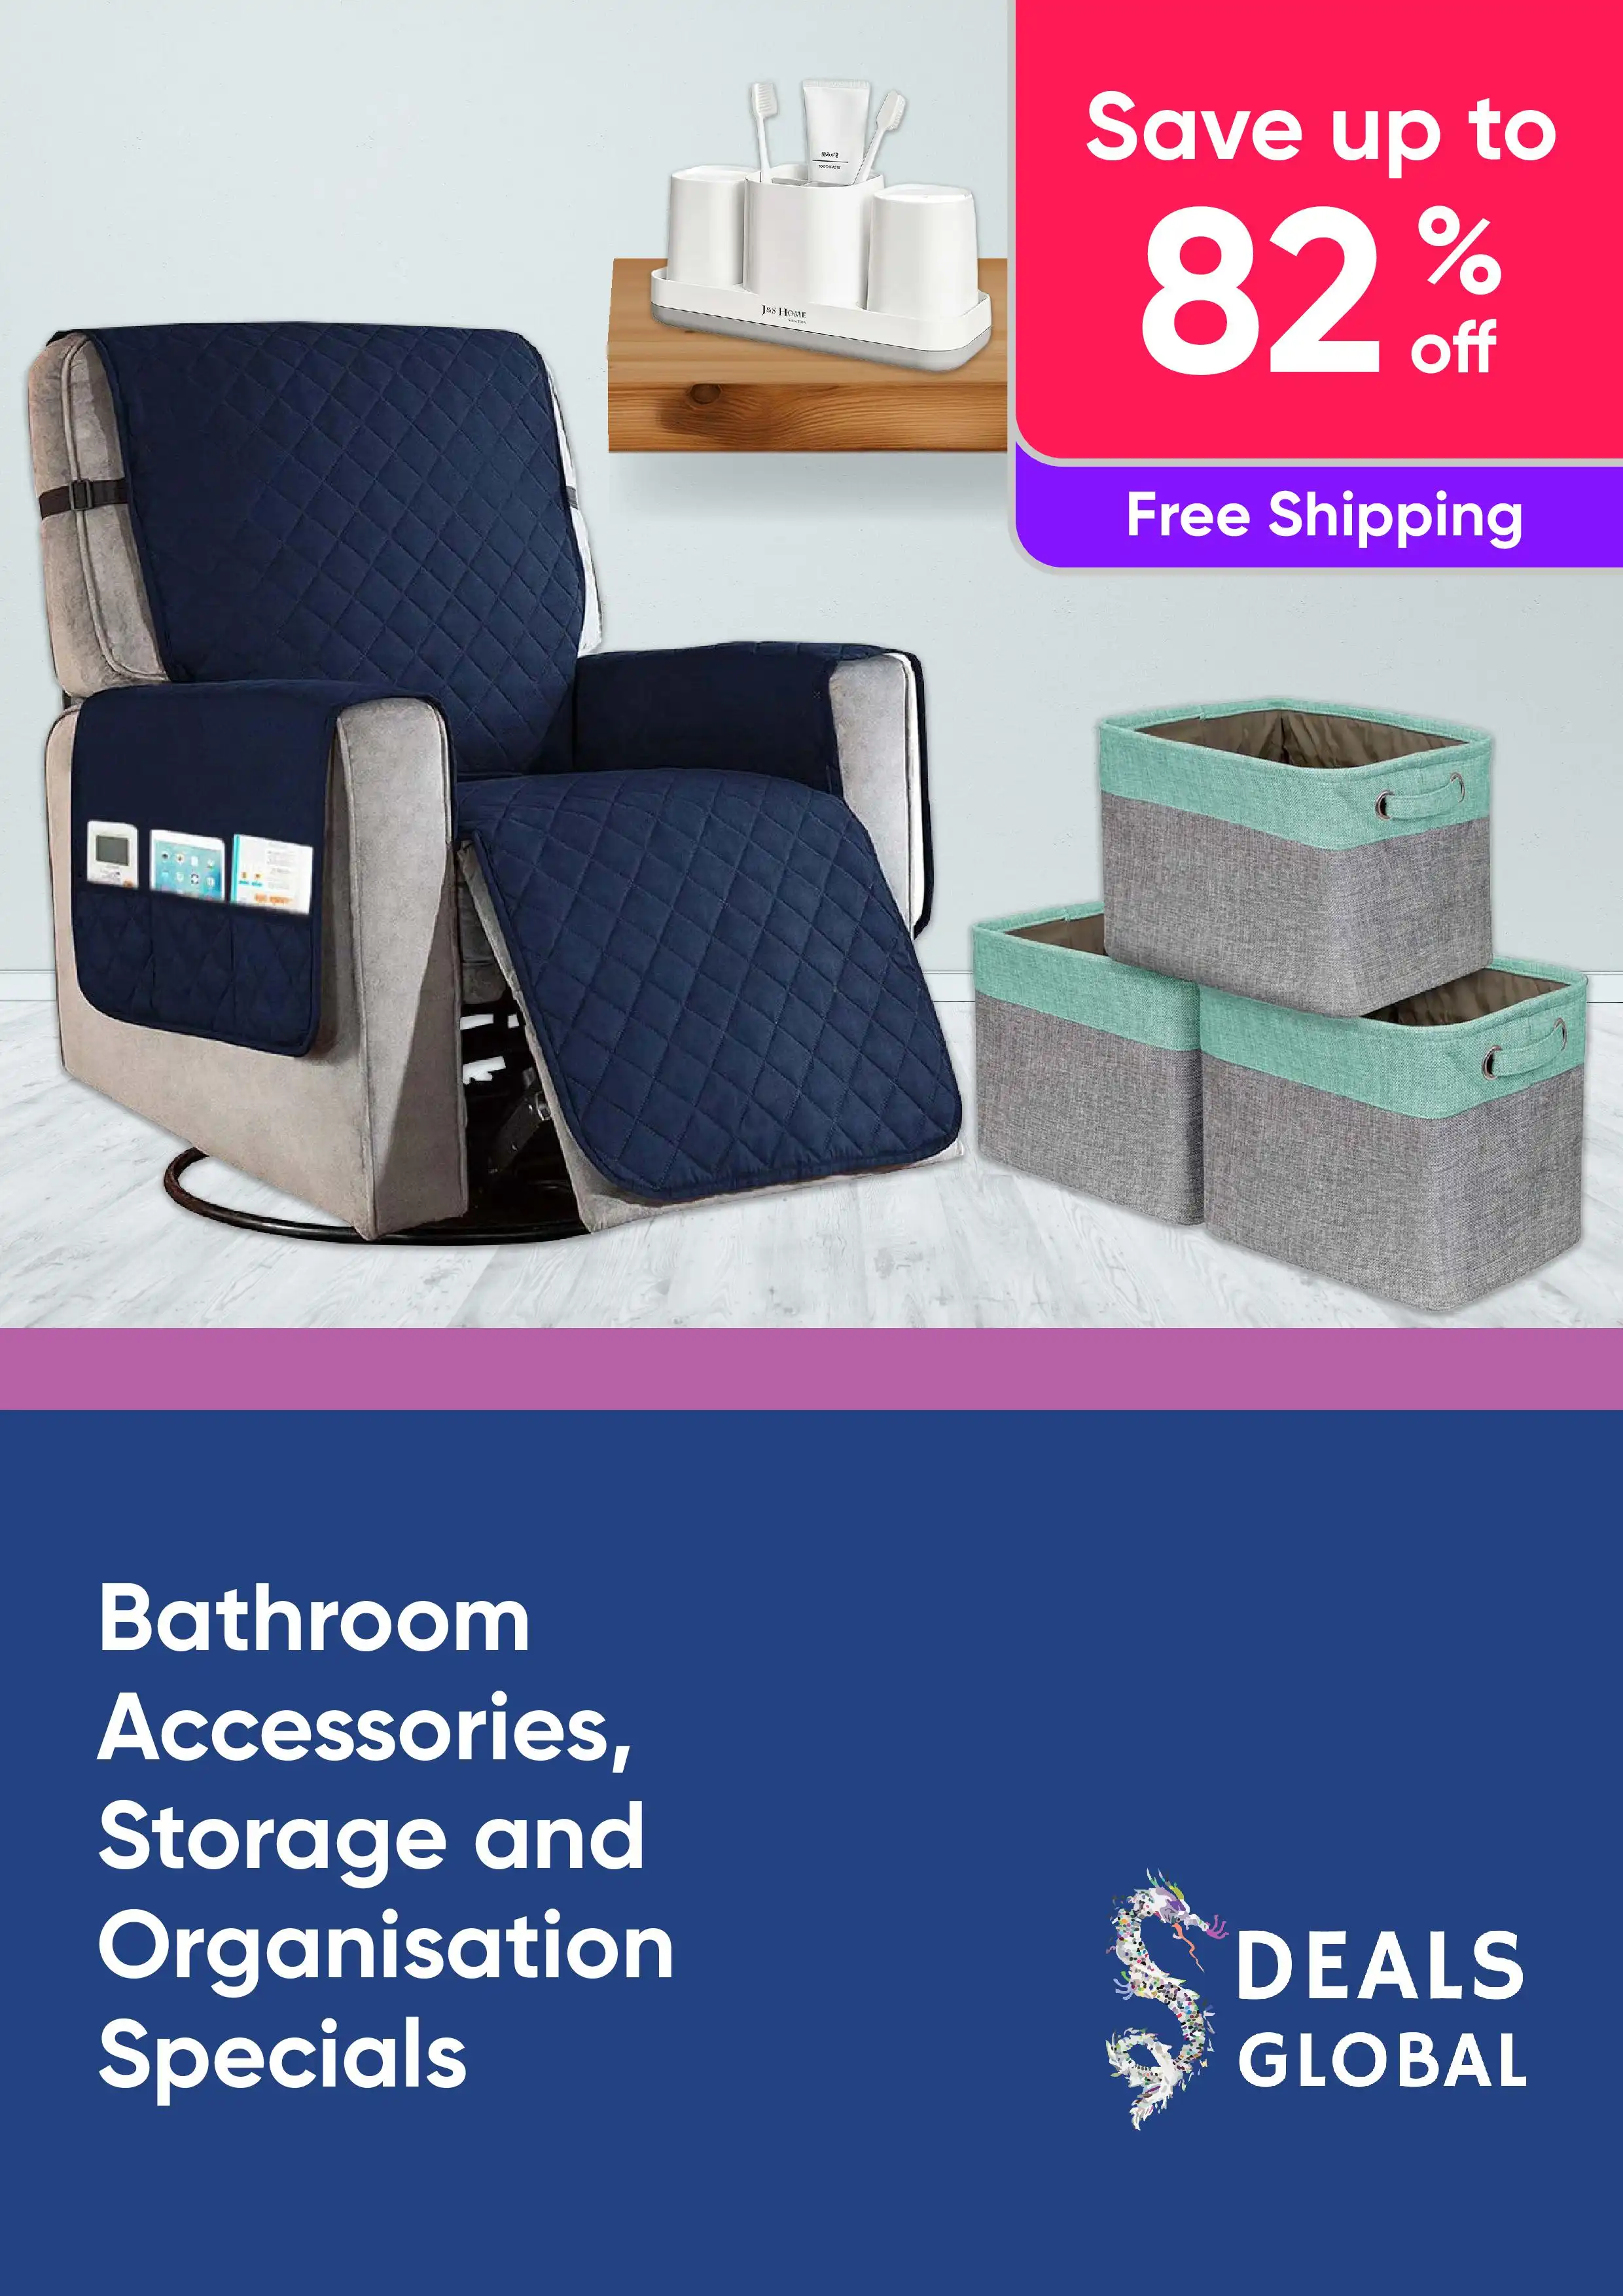 Bathroom Accessories, Storage and Organisation Specials - Save Up to 82% Off